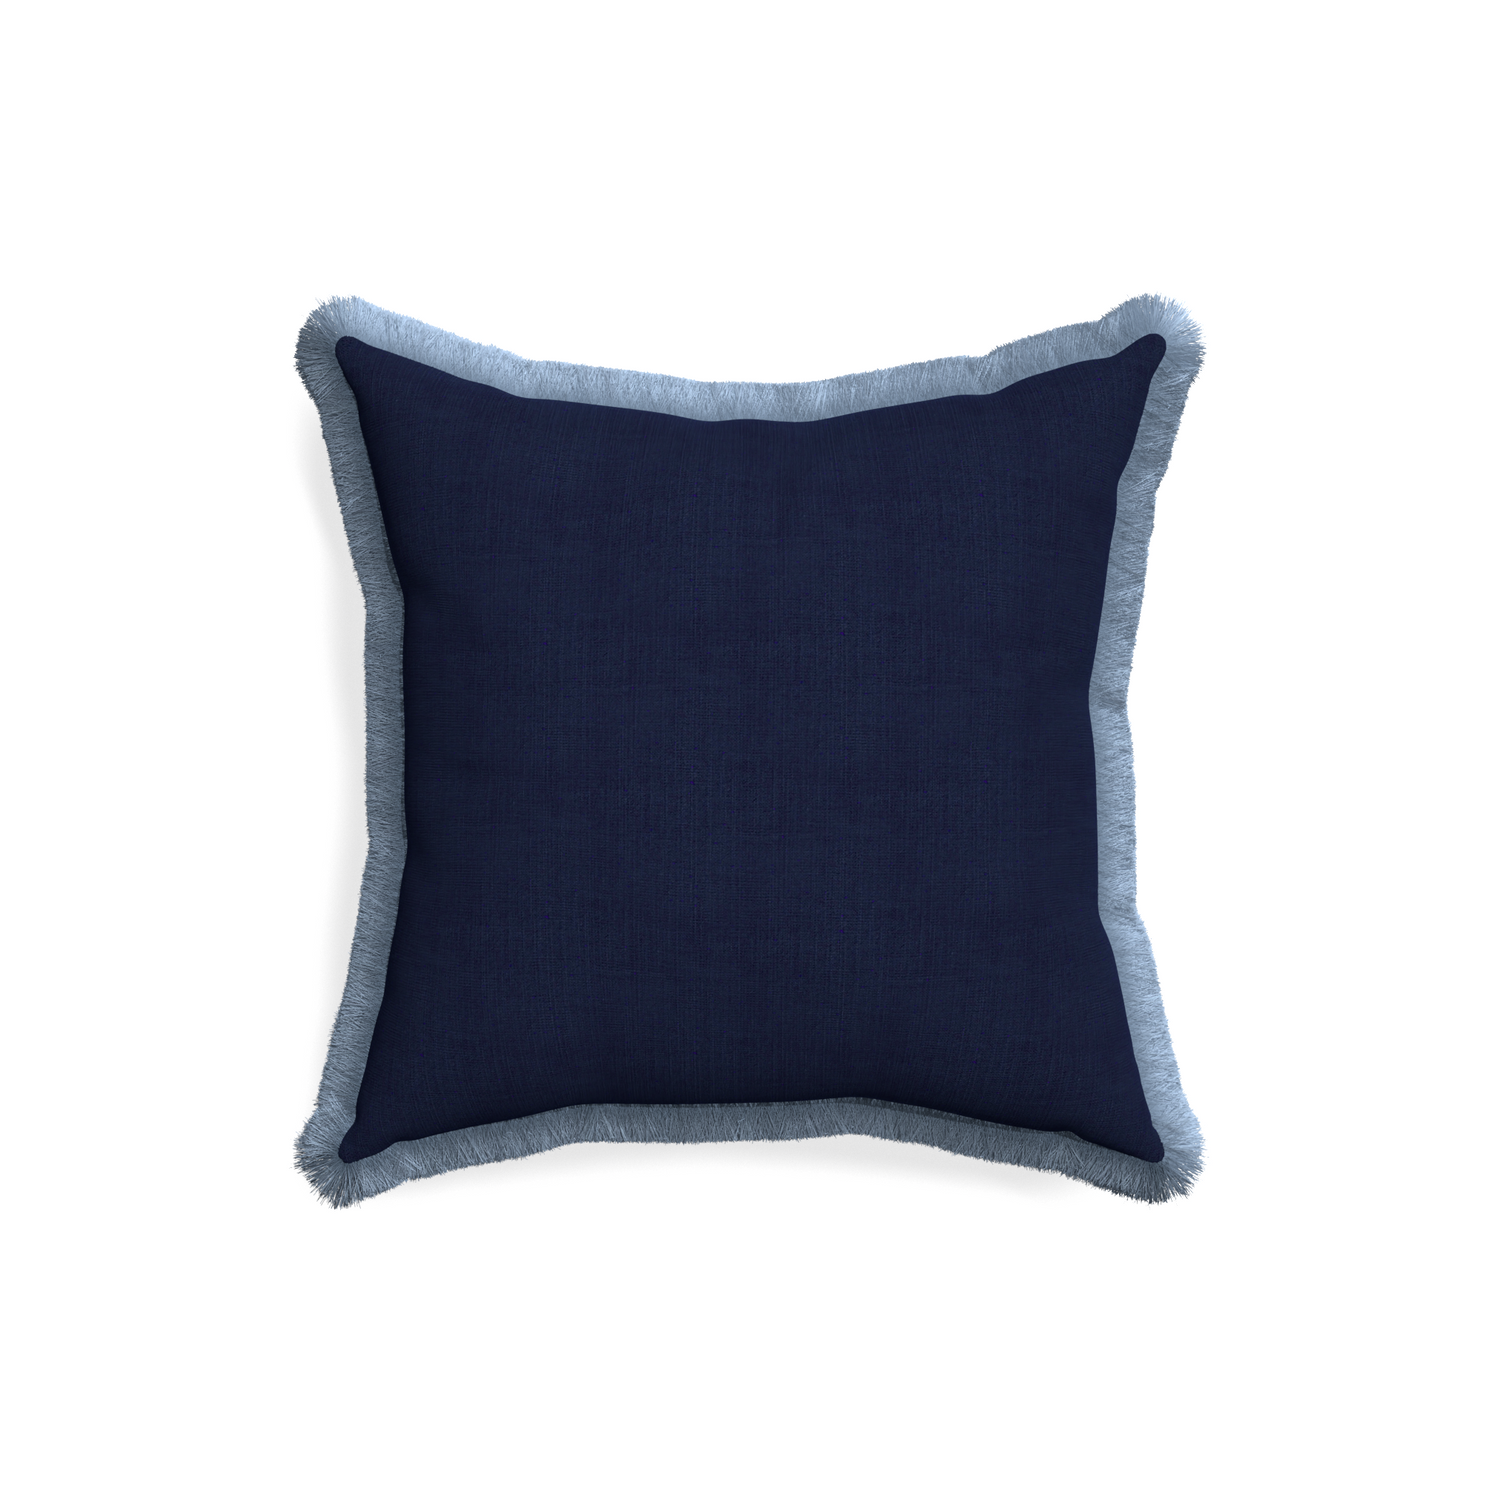 18-square midnight custom pillow with sky fringe on white background